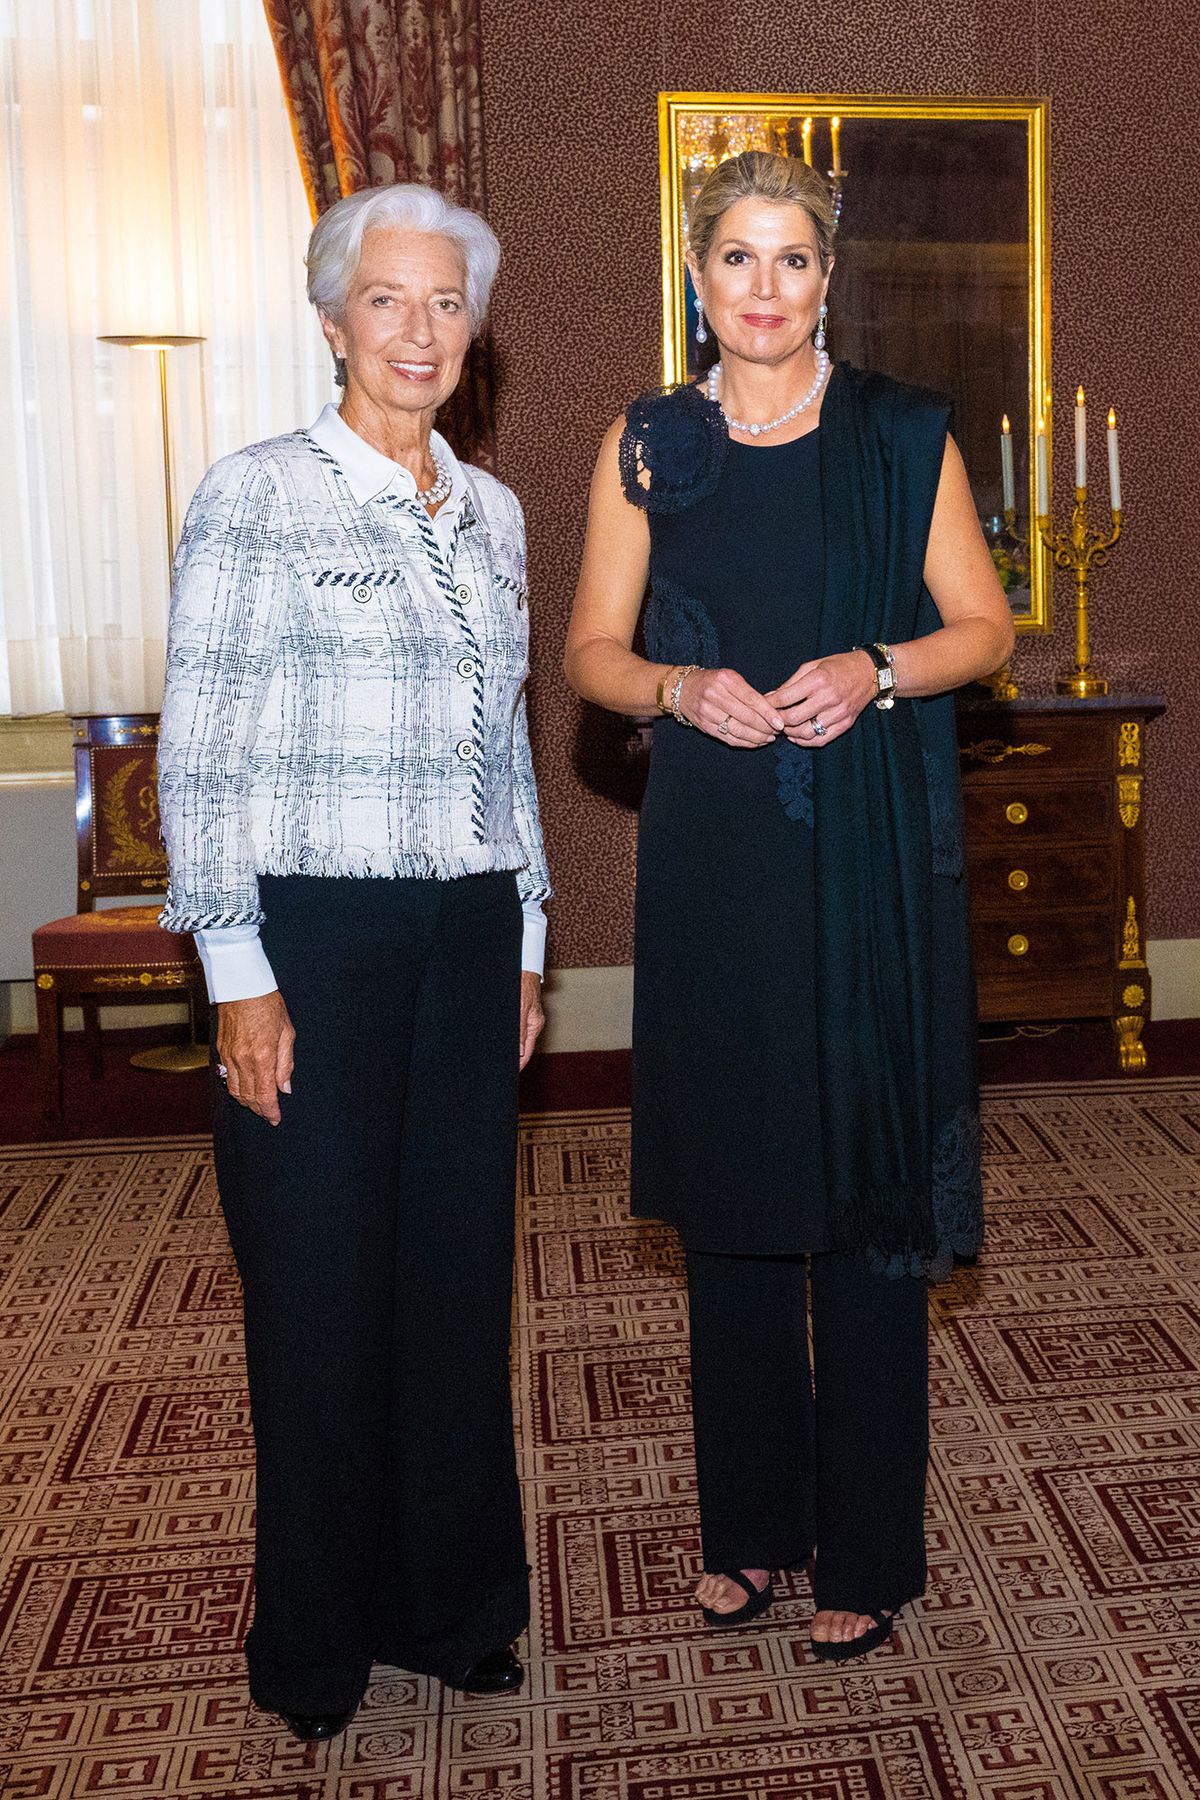 Queen Maxima of The Netherlands (R) poses with President of the European Central Bank (ECB) Christine Lagarde prior to a dinner with European central bank heads in Amsterdam, on June 8, 2022. - . (Photo by Mischa Schoemaker / various sources / AFP) / Netherlands OUT